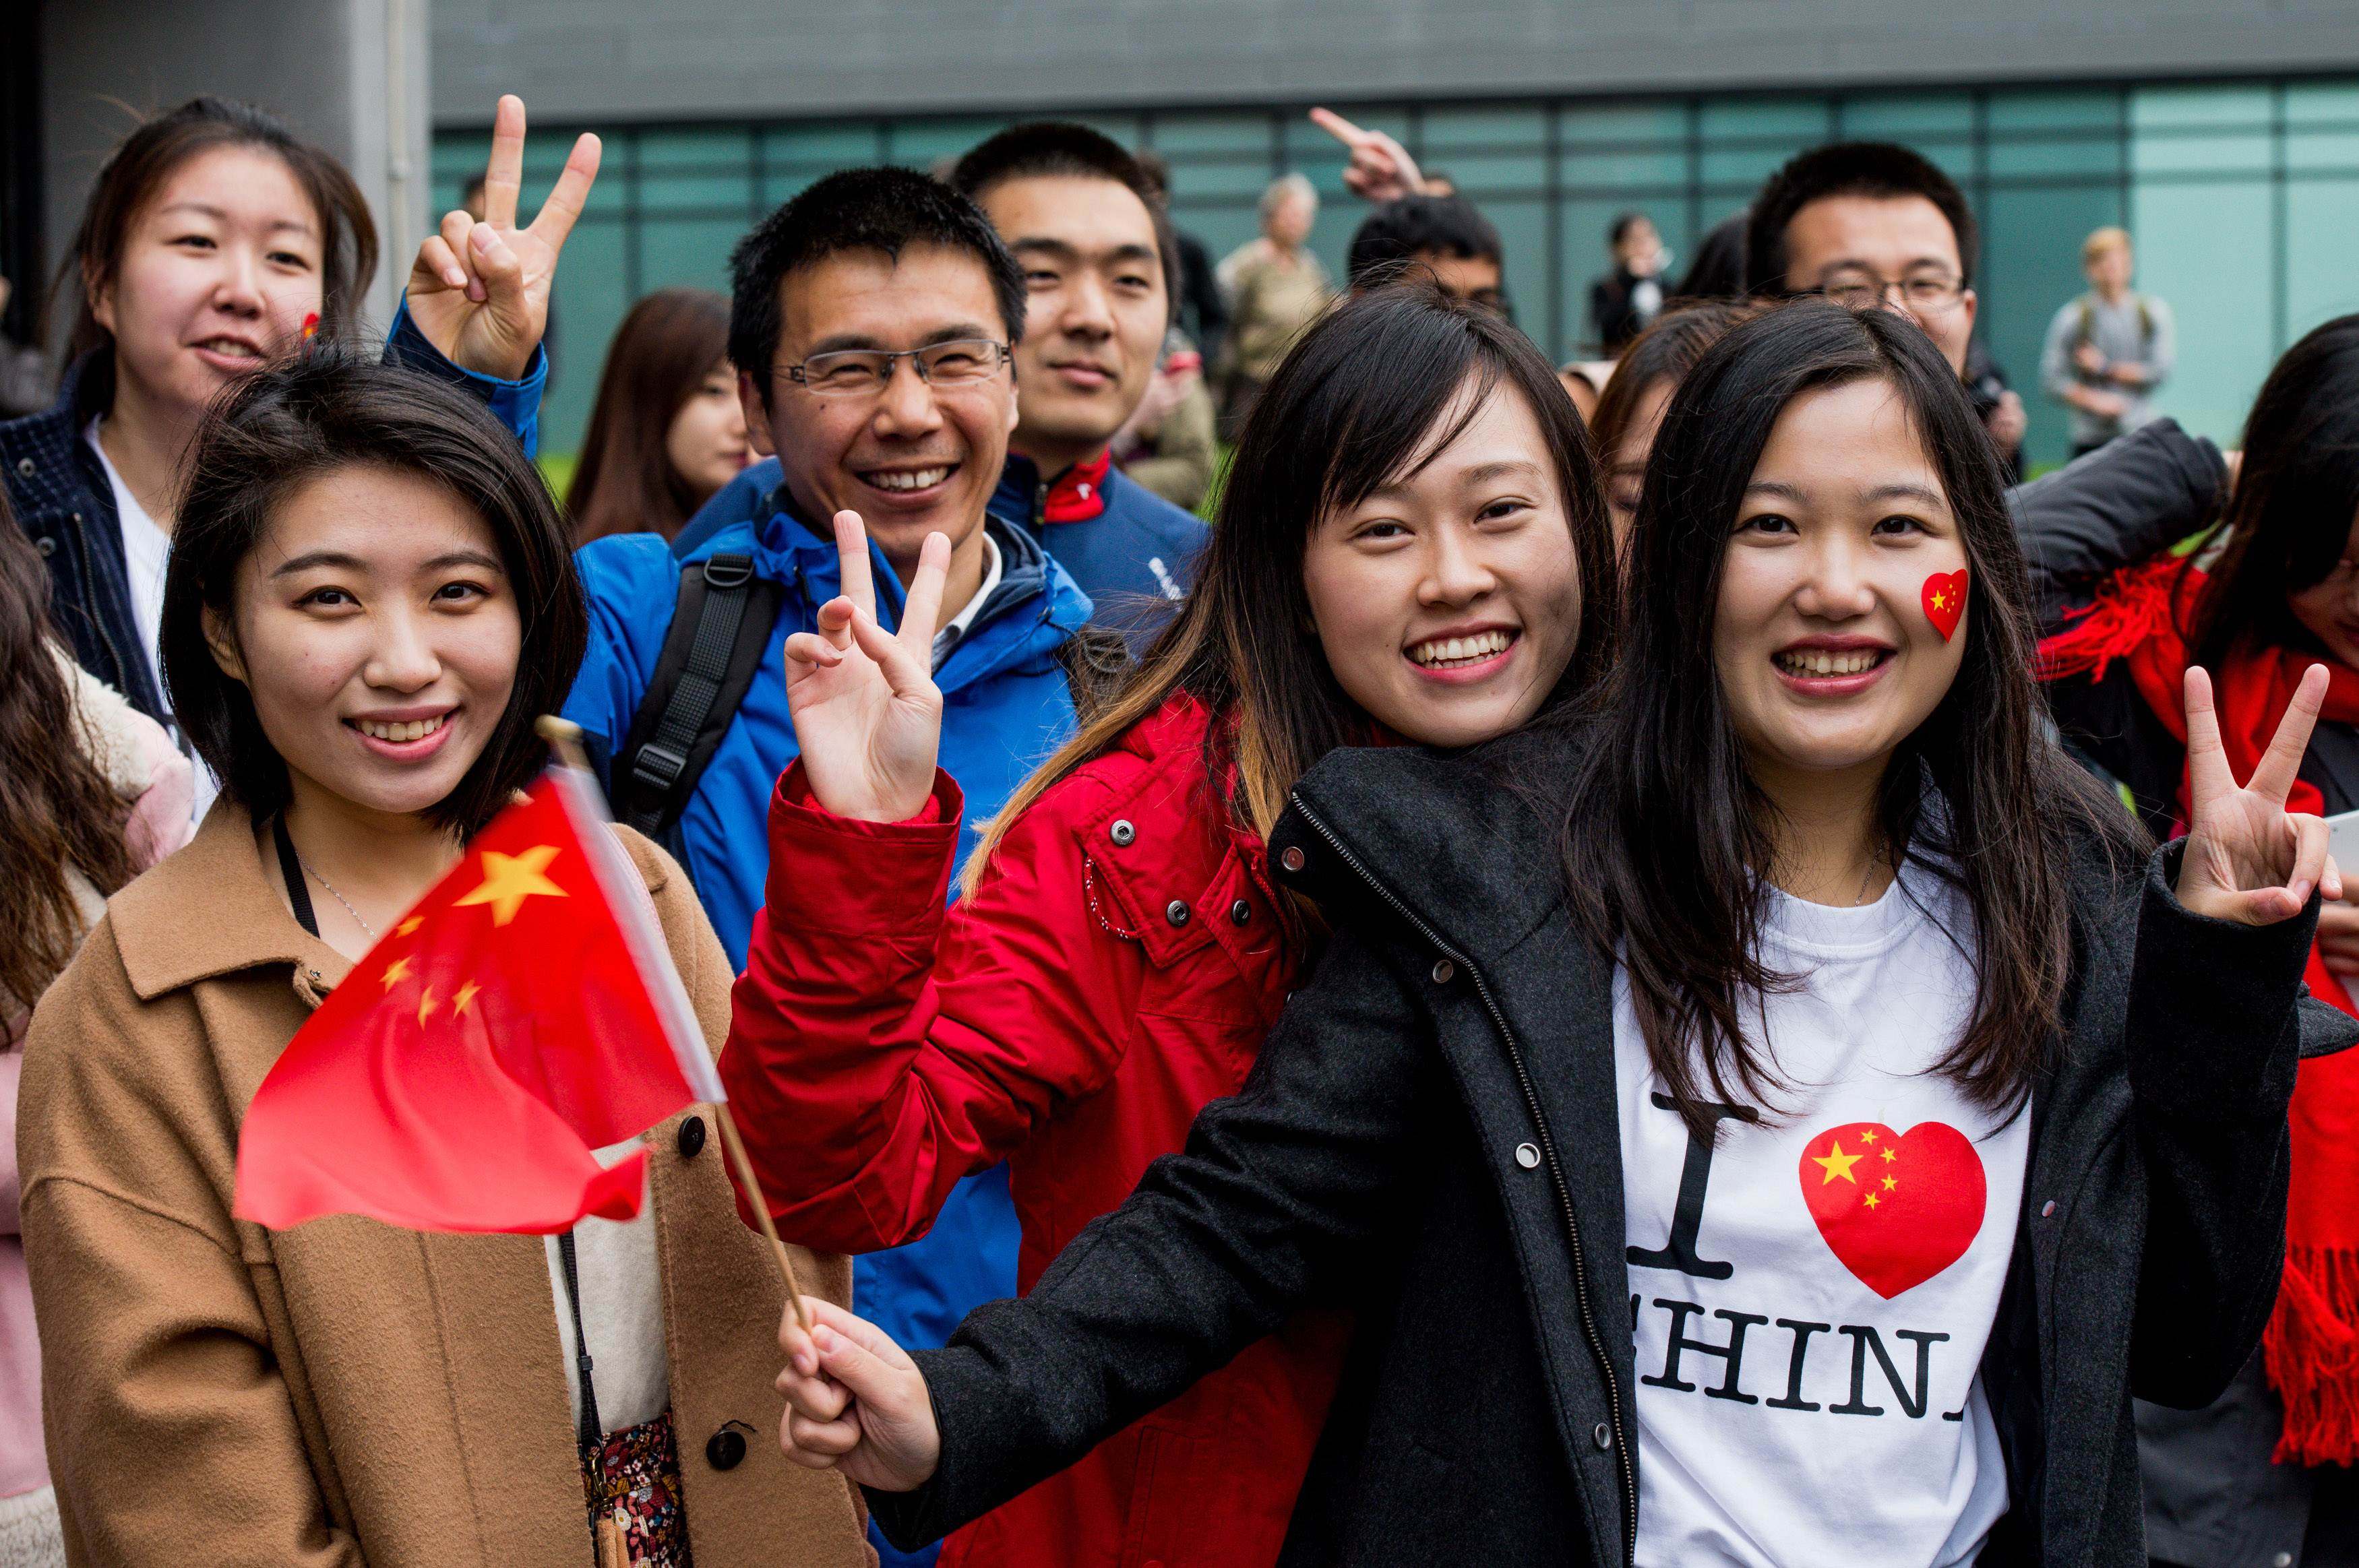 As Chinese universities climb up world rankings, overseas graduates are returning home to find they are no longer the top pick for jobs. Photo: AFP